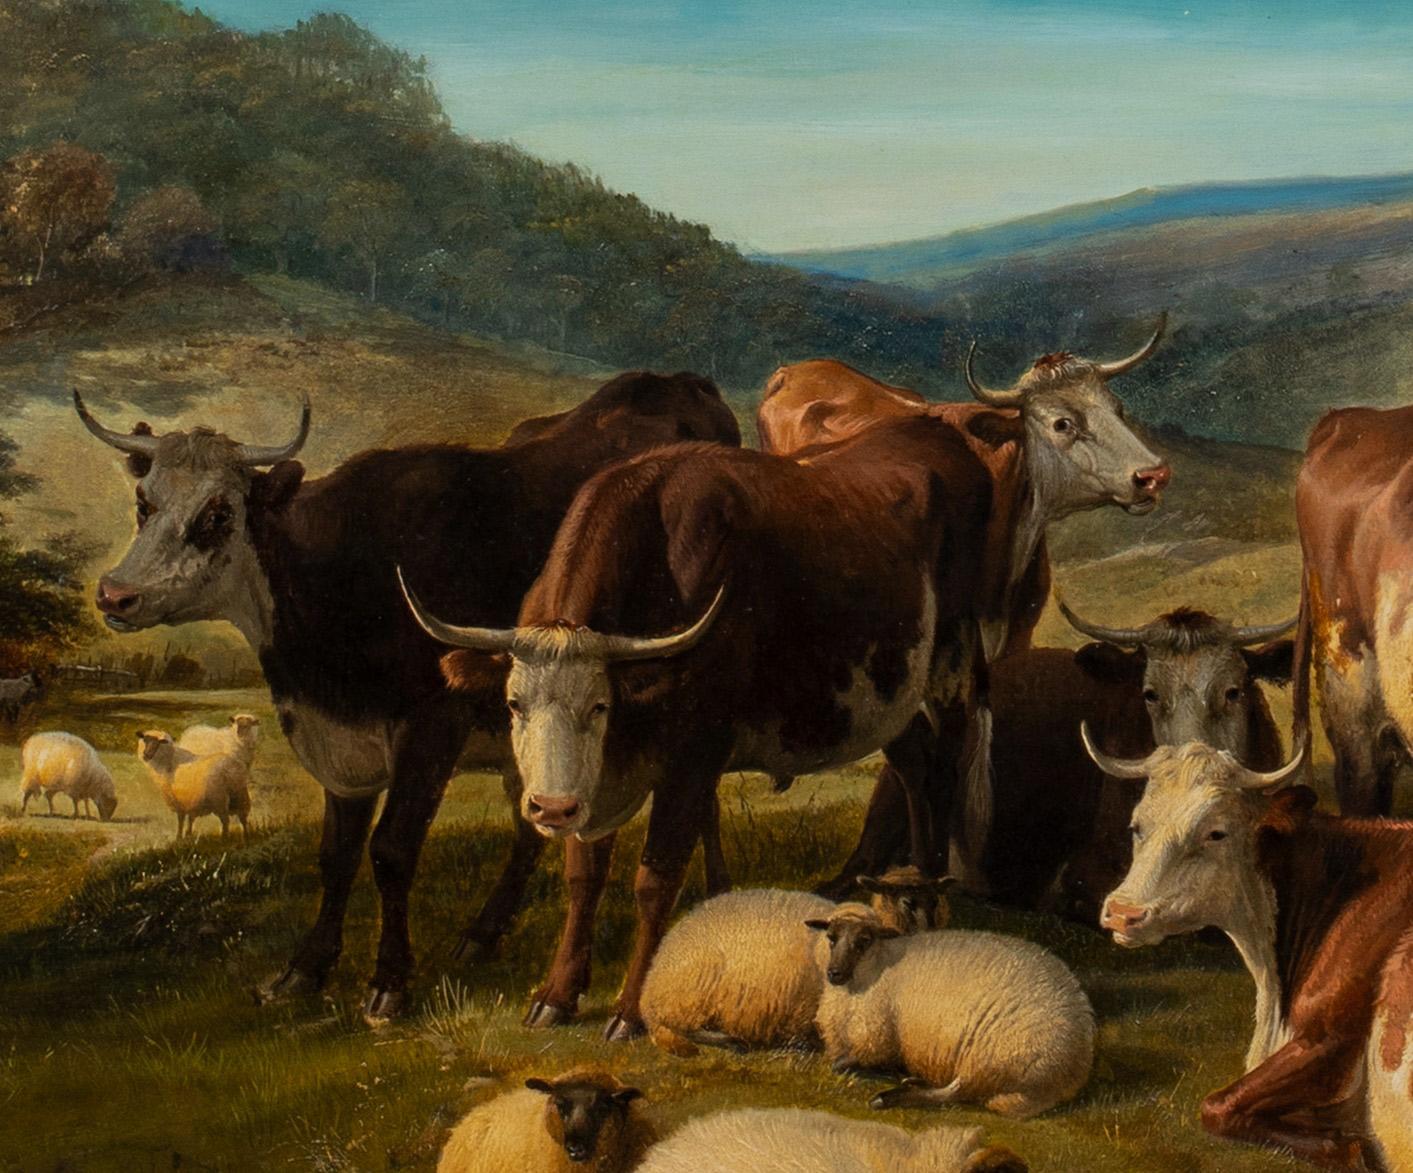 Cattle And Sheep Resting By The Water, 19th Century

Thomas Sidney Cooper, RA (1803-1902) - Rare large example of the artists

Huge 19th Century English landscape with cattle and sheep resting at a watering hole, oil on canvas by Thomas Sidney